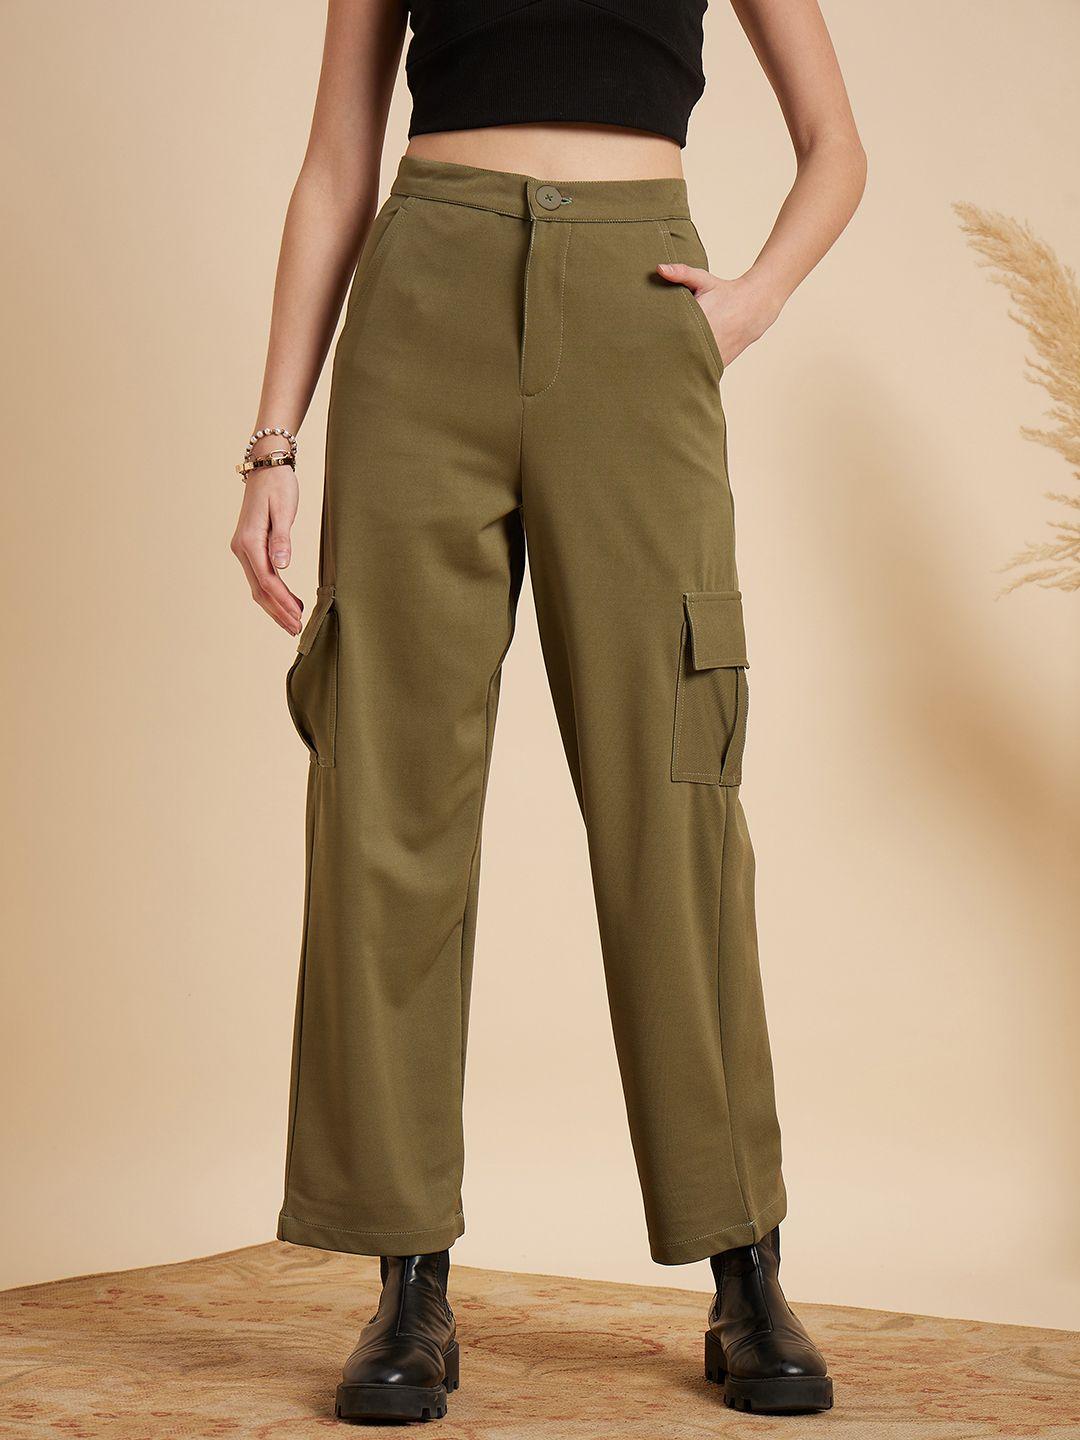 mint-street-women-olive-green-tailored-straight-fit-chinos